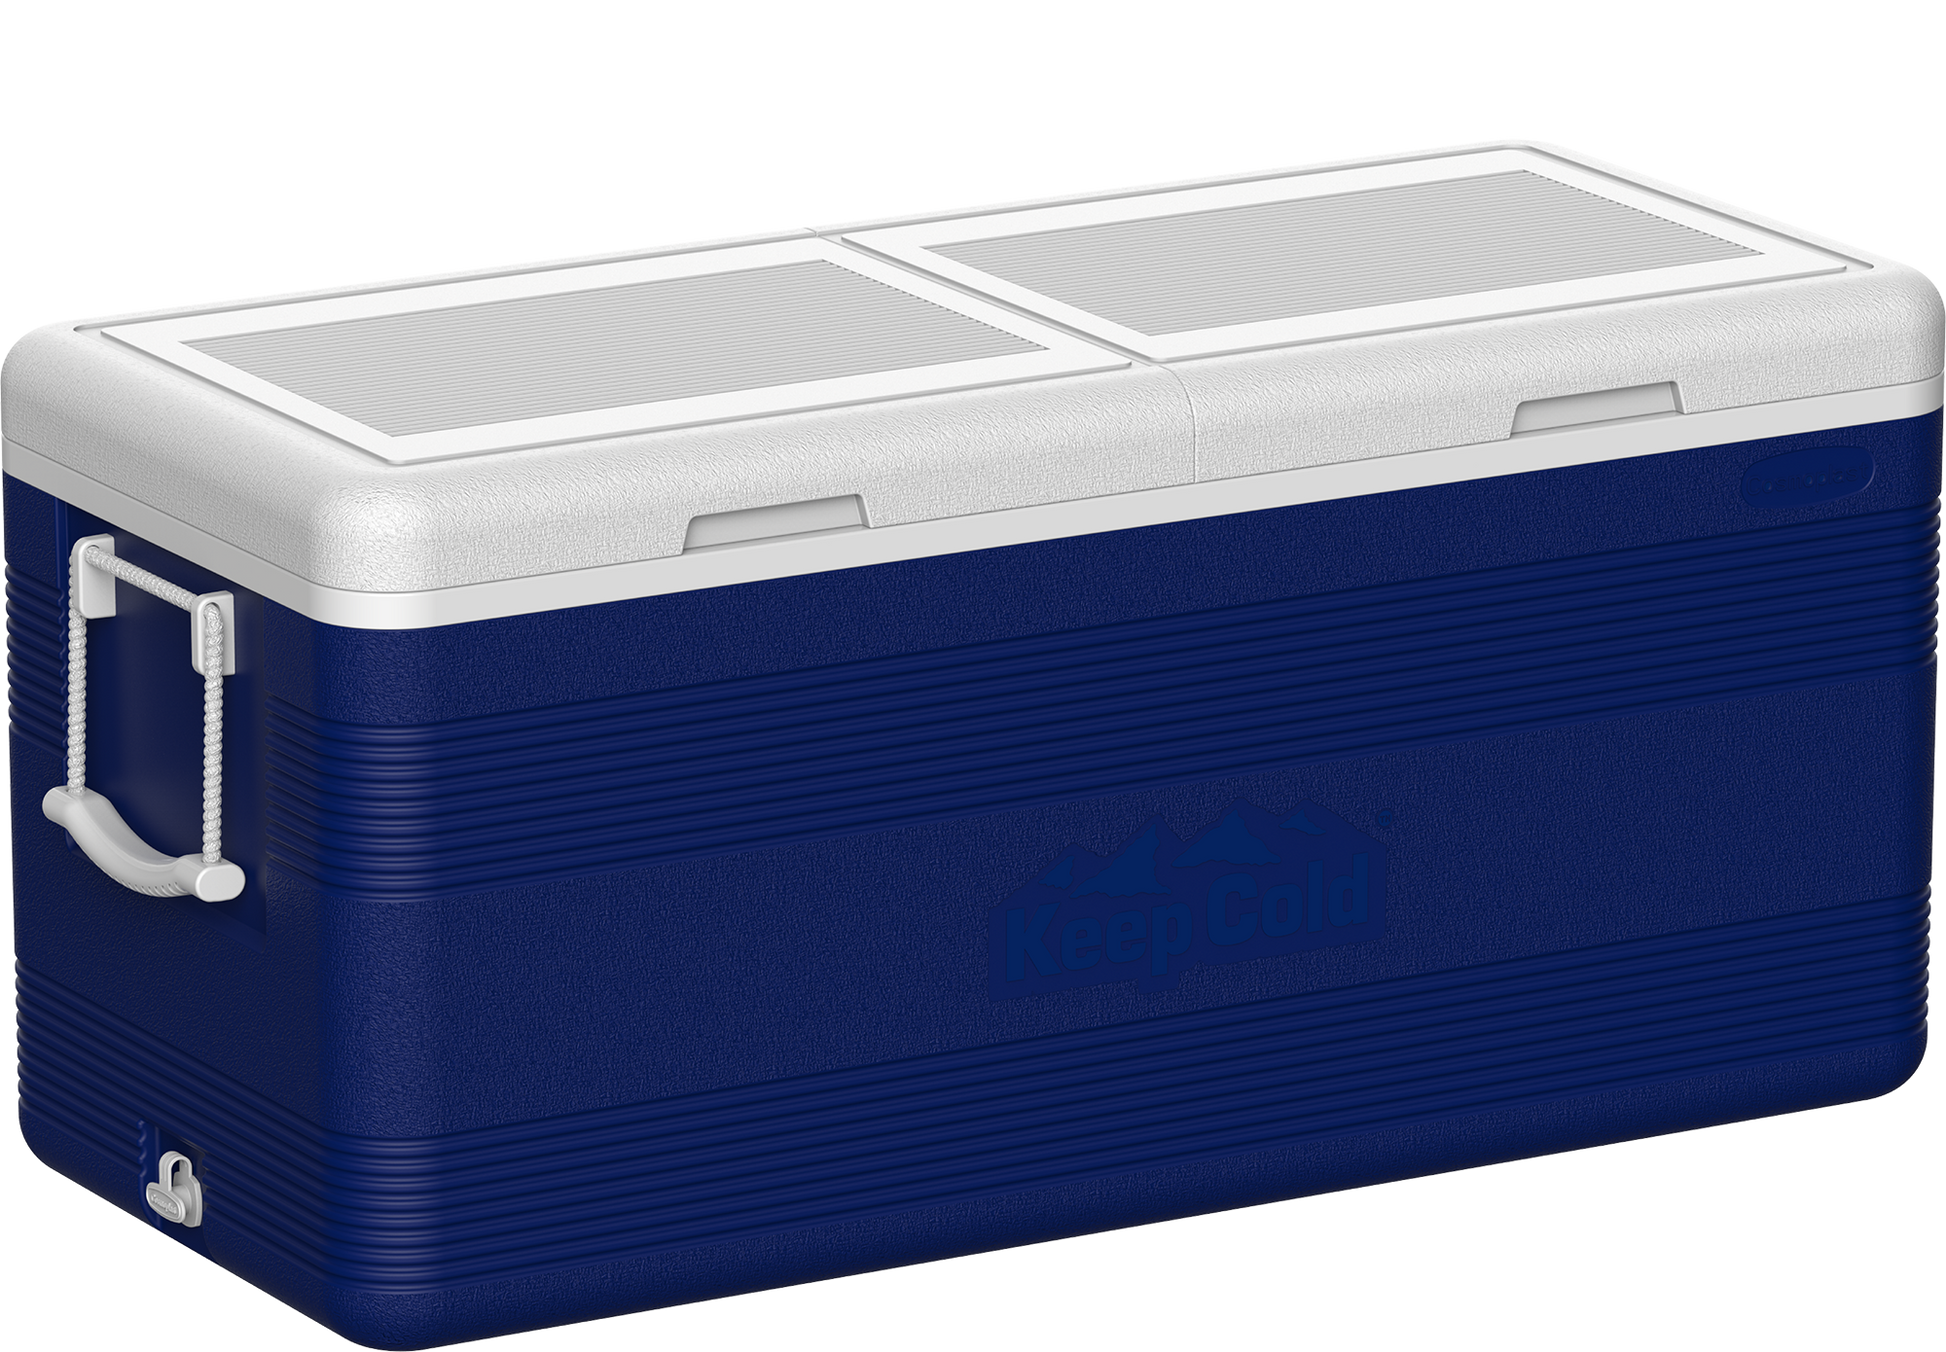 144L KeepCold Deluxe Icebox - Cosmoplast Bahrain